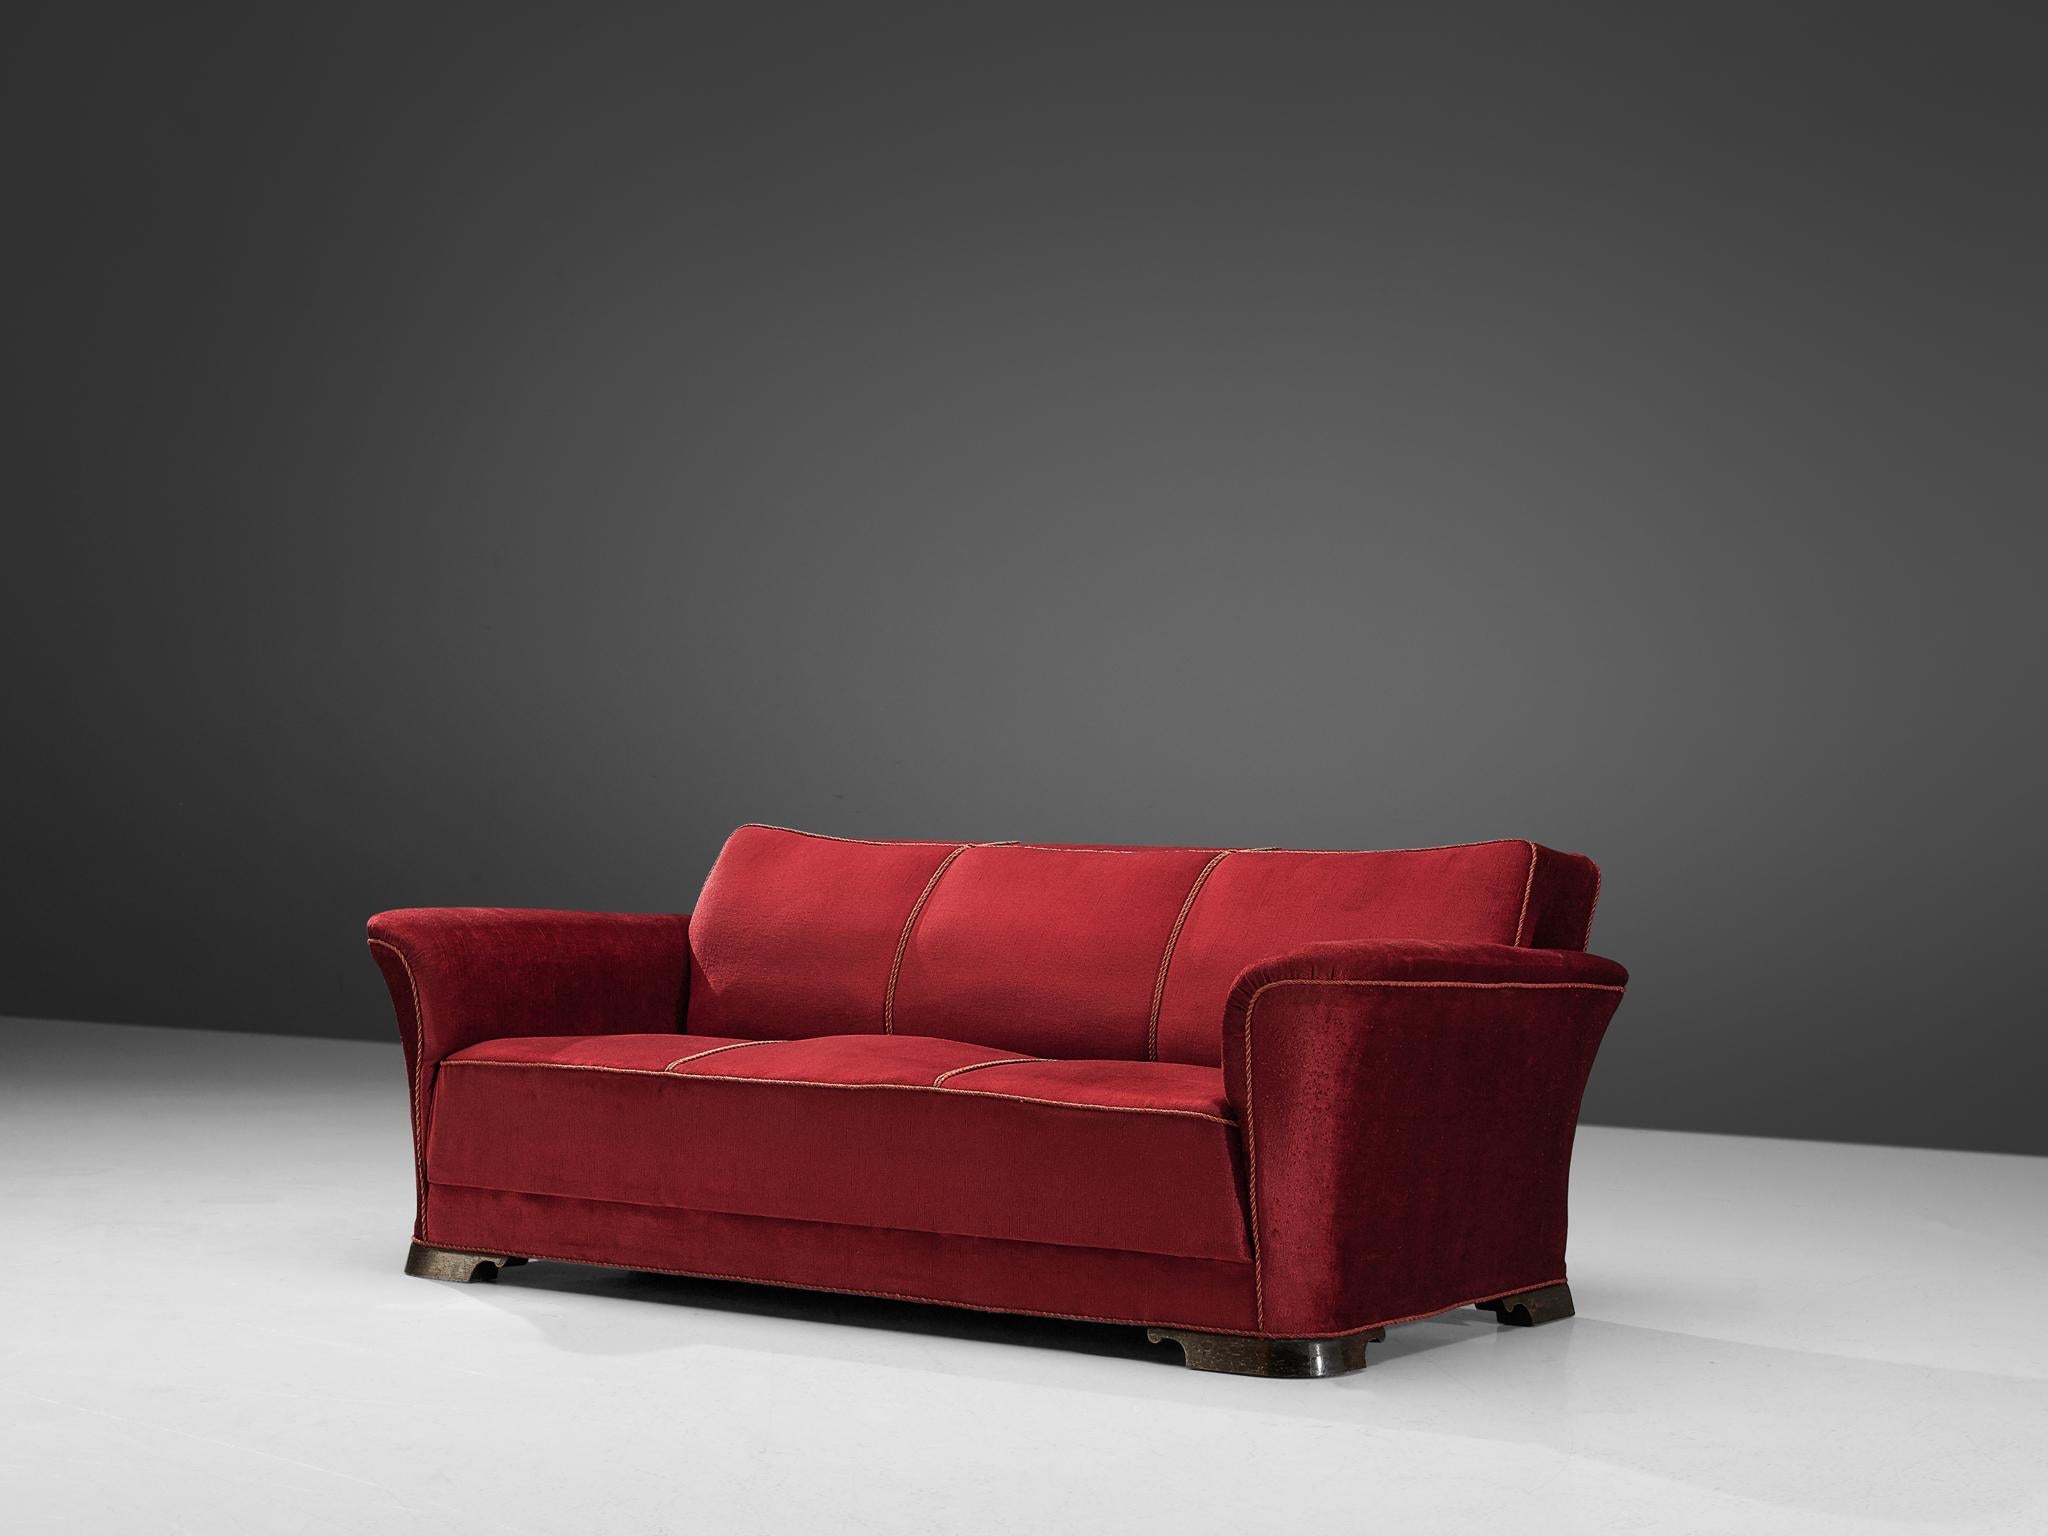 Three-seat sofa, velours and mahogany, Denmark, 1940s

A grand and comfortable three-seat sofa in red velours upholstery. The sofa features a thick seat, which is characteristic for the Art Deco movement. Large upsweeping armrests curve slightly